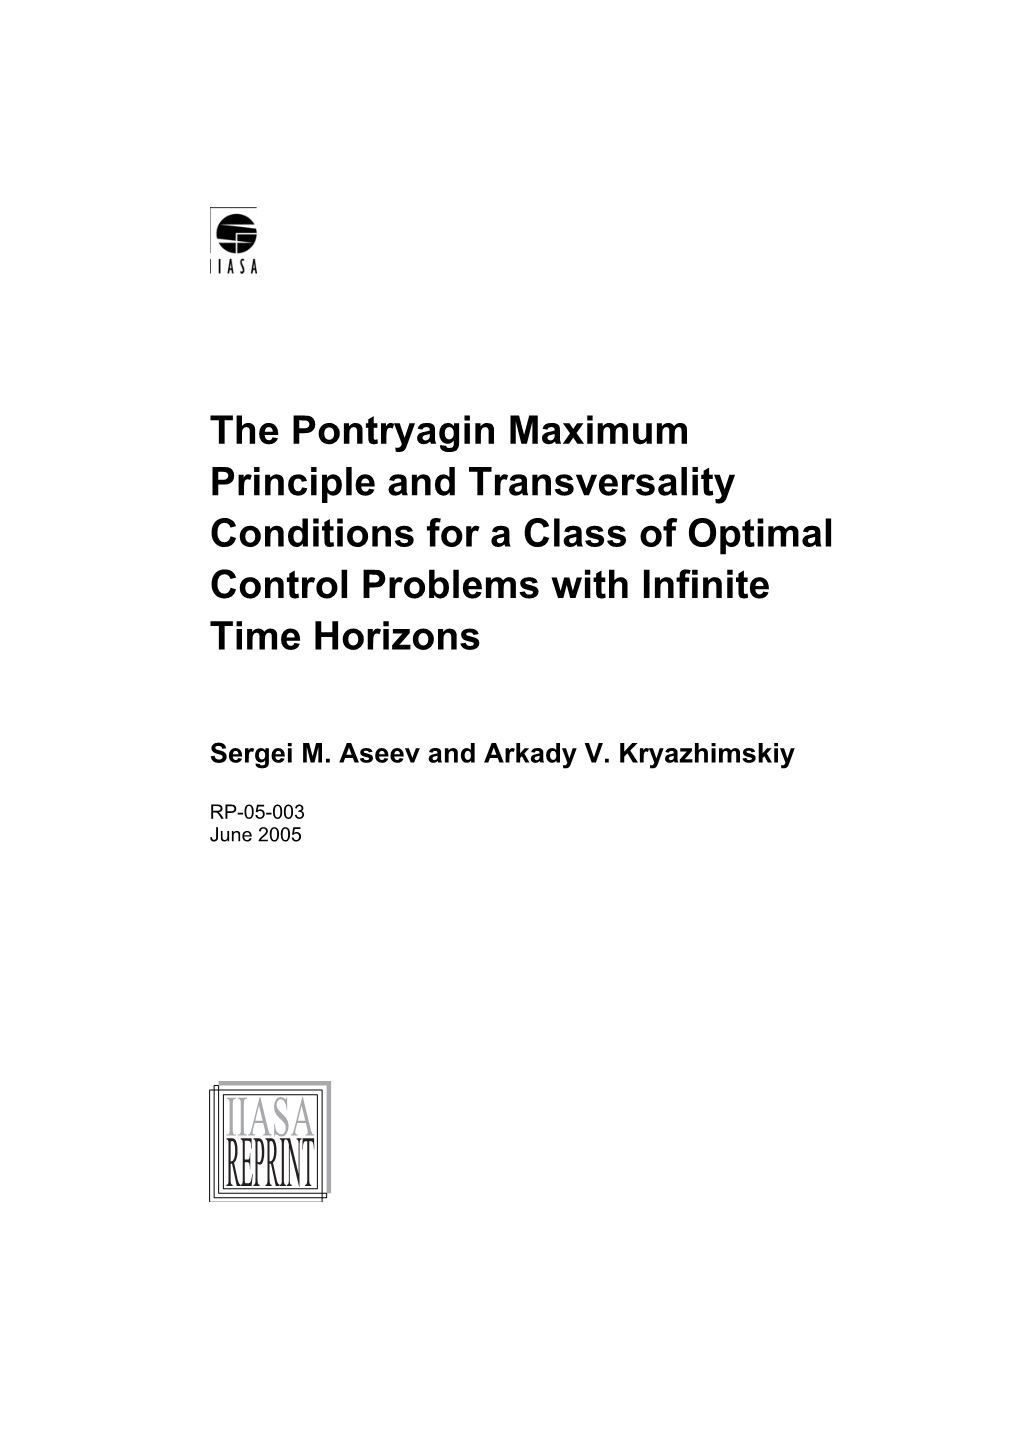 The Pontryagin Maximum Principle and Transversality Conditions for a Class of Optimal Control Problems with Infinite Time Horizons